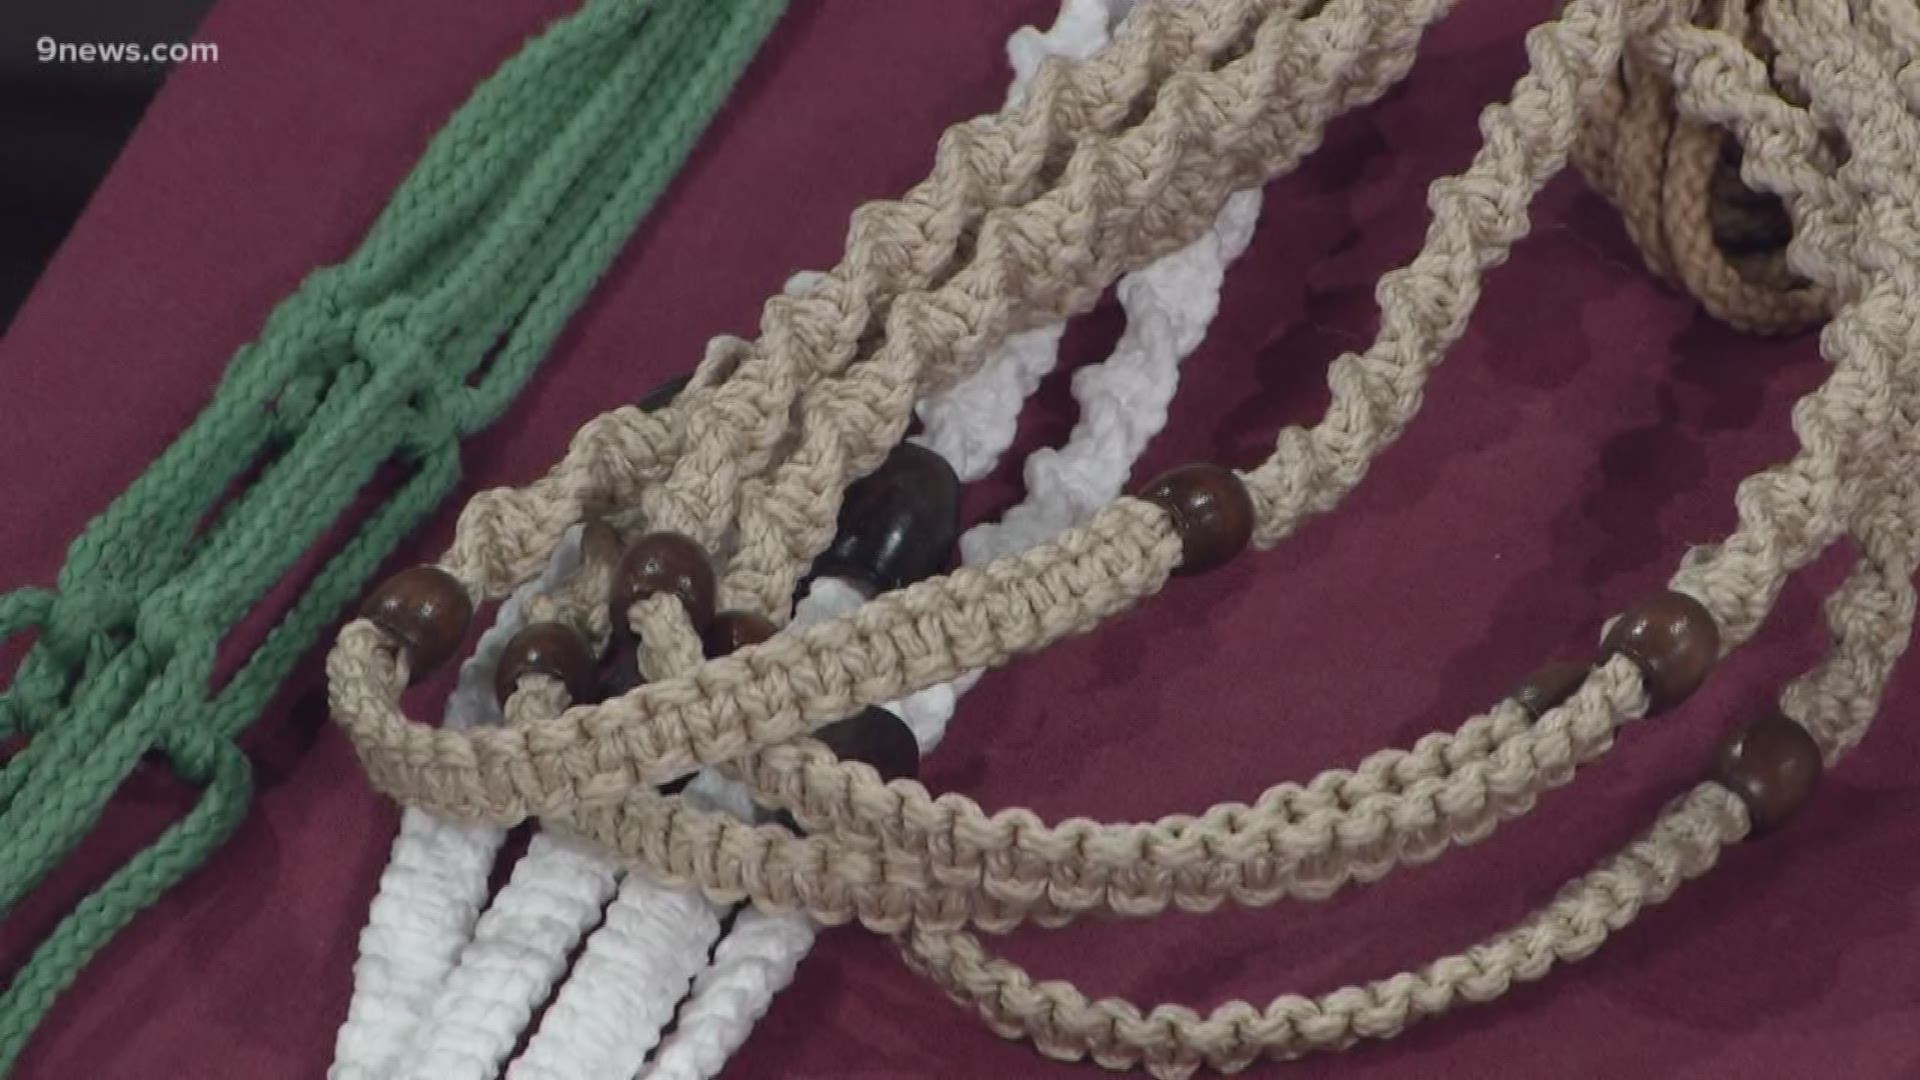 The supplies needed to make macramé are simple. Cording made of twine, jute, or leather can be used in everything from wall hangings to jewelry.